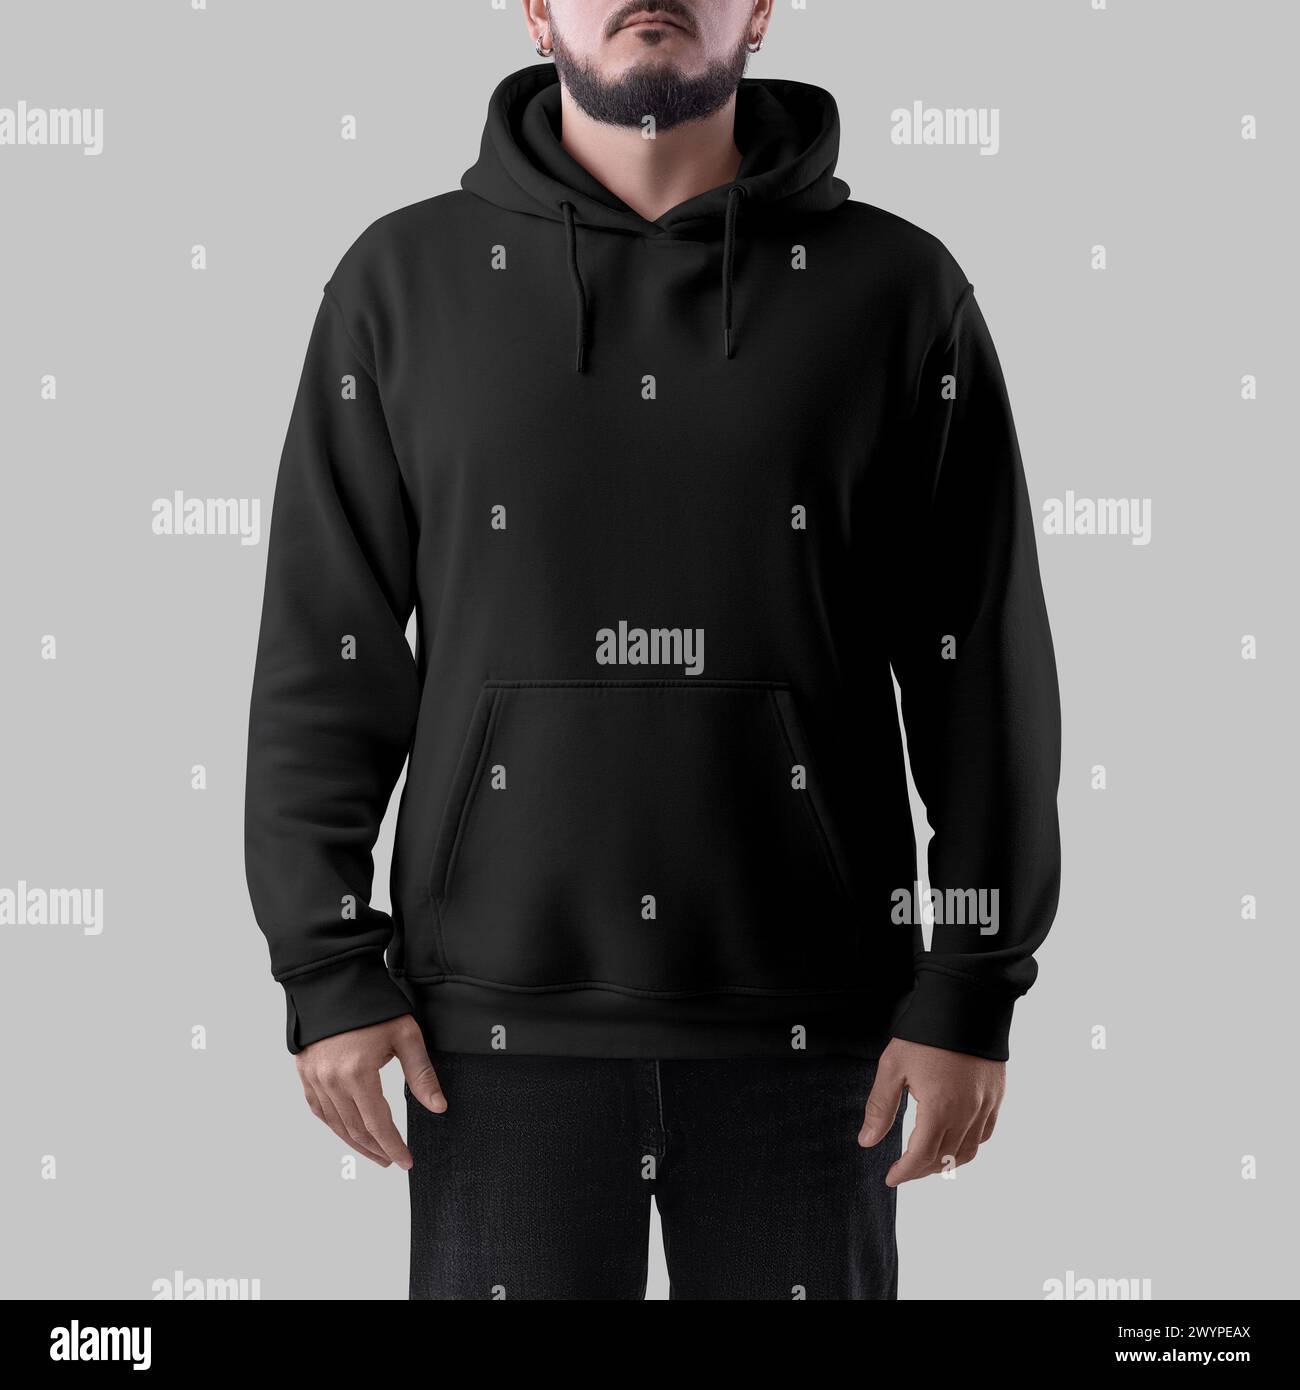 Mockup of a black oversized hoodie on a bearded man, for design, branding, advertising, front view. Fashion clothing template with laces, cuffs, pocke Stock Photo